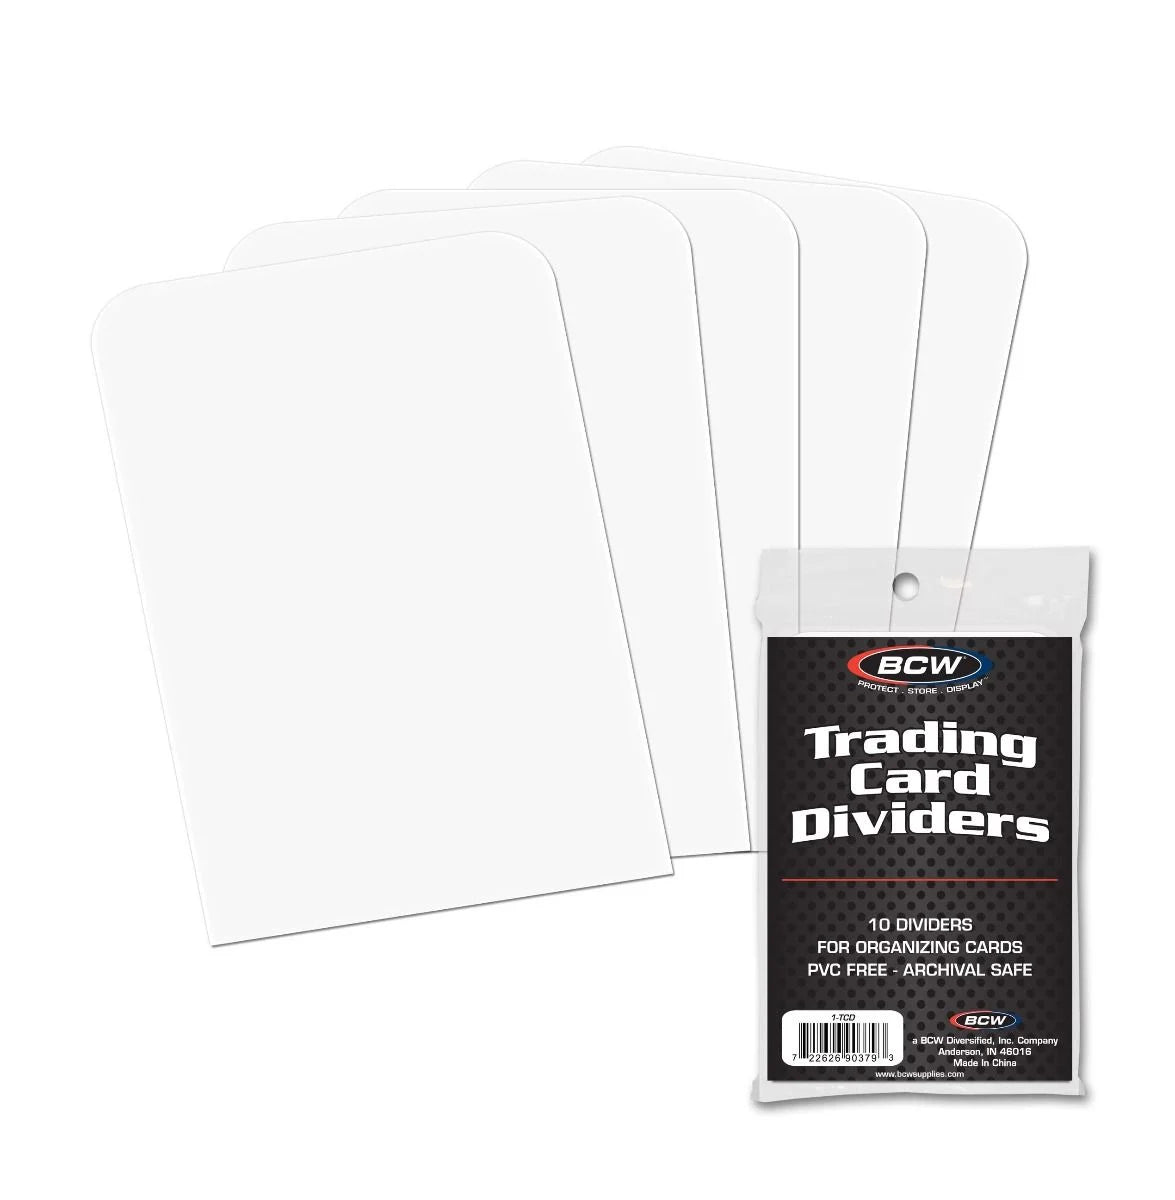 BCW: Trading Card Dividers (10 Dividers)